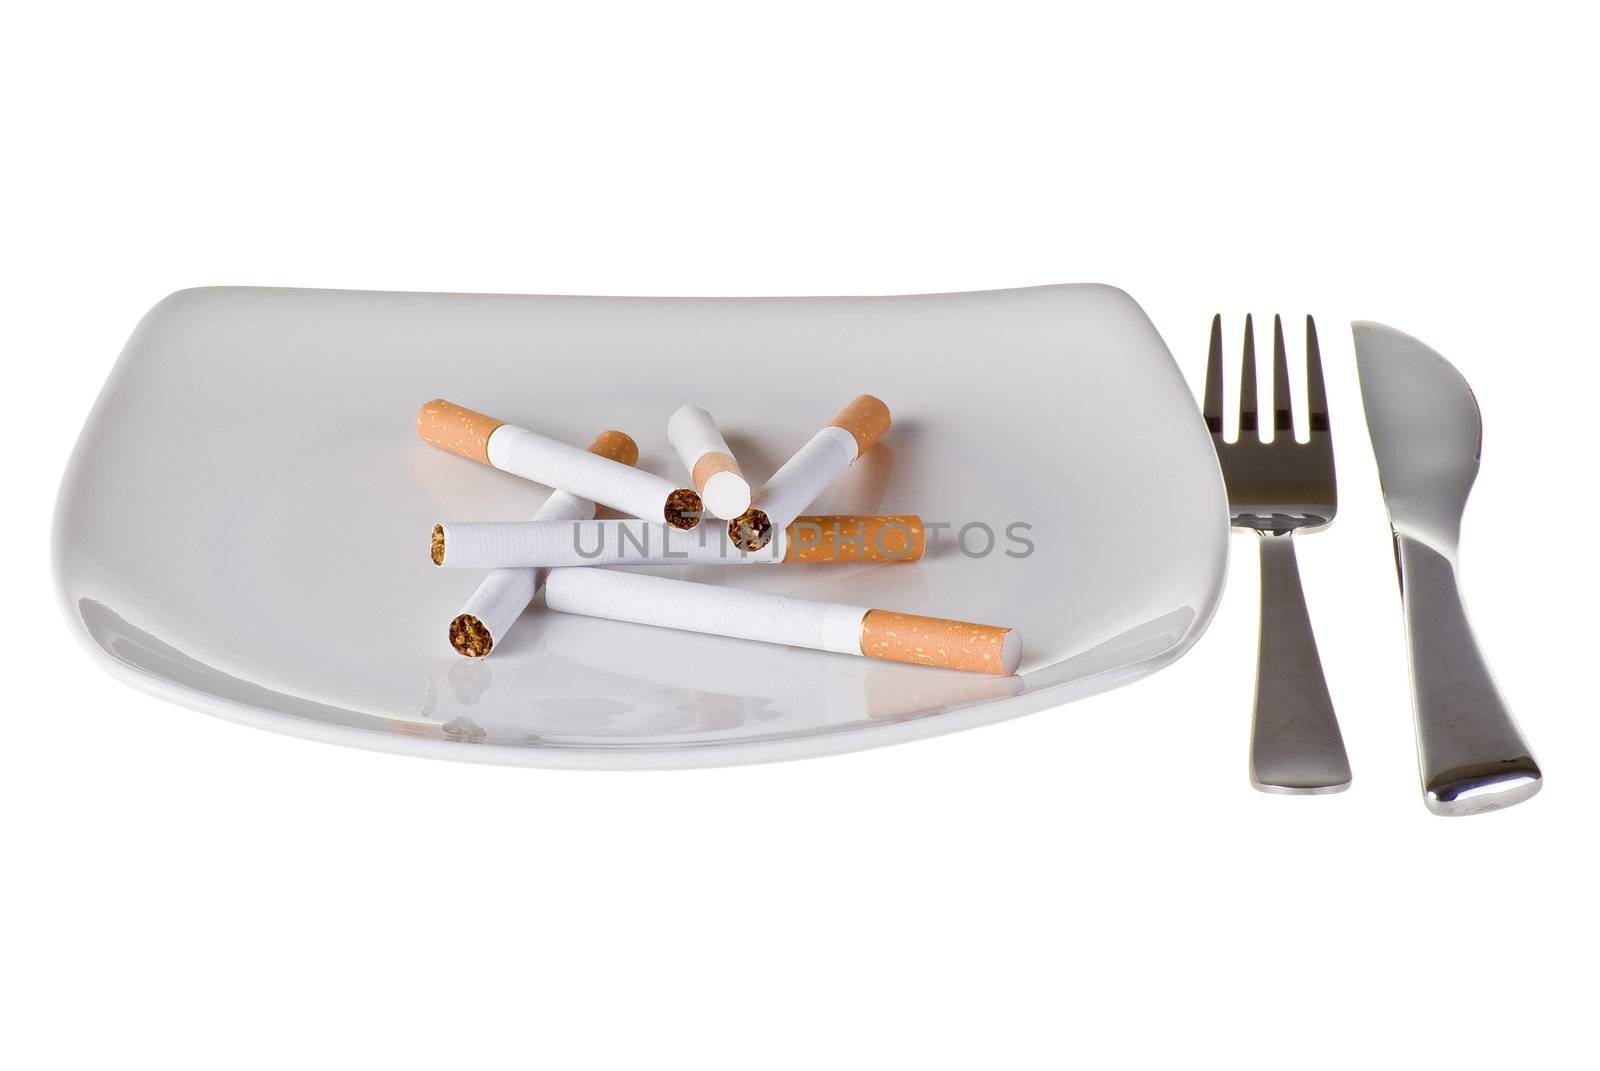 Several cigarettes on the plate with fork and knife